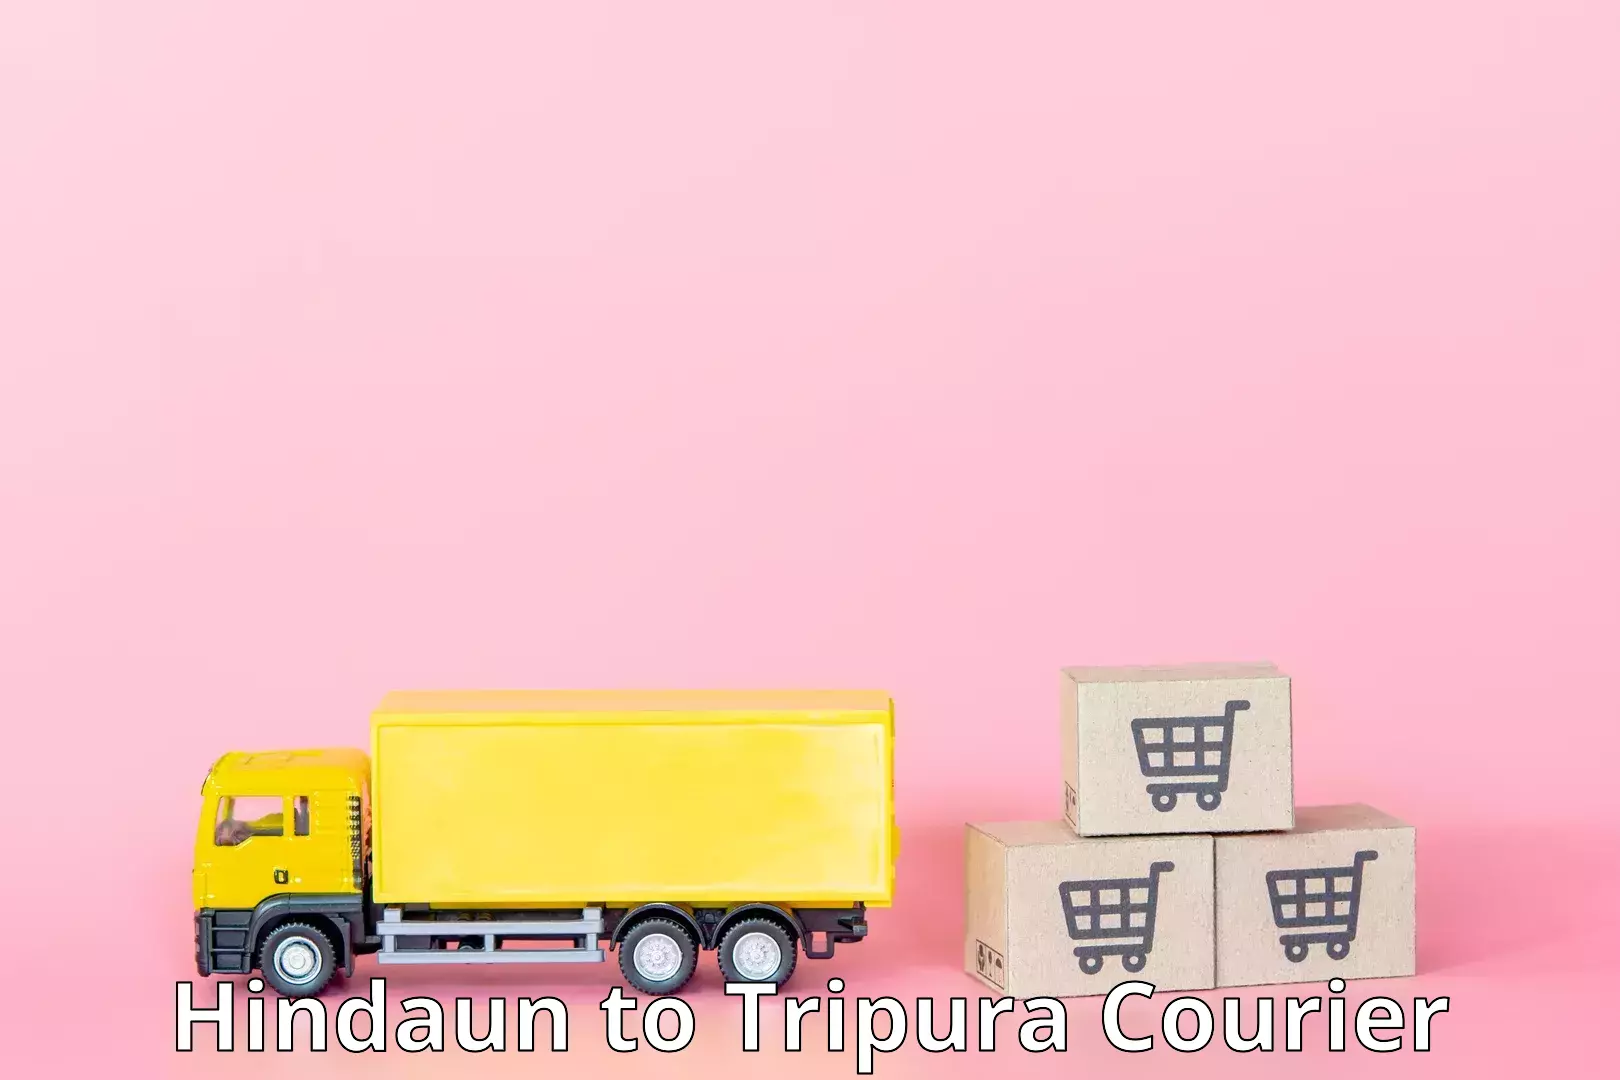 Global courier networks Hindaun to Tripura